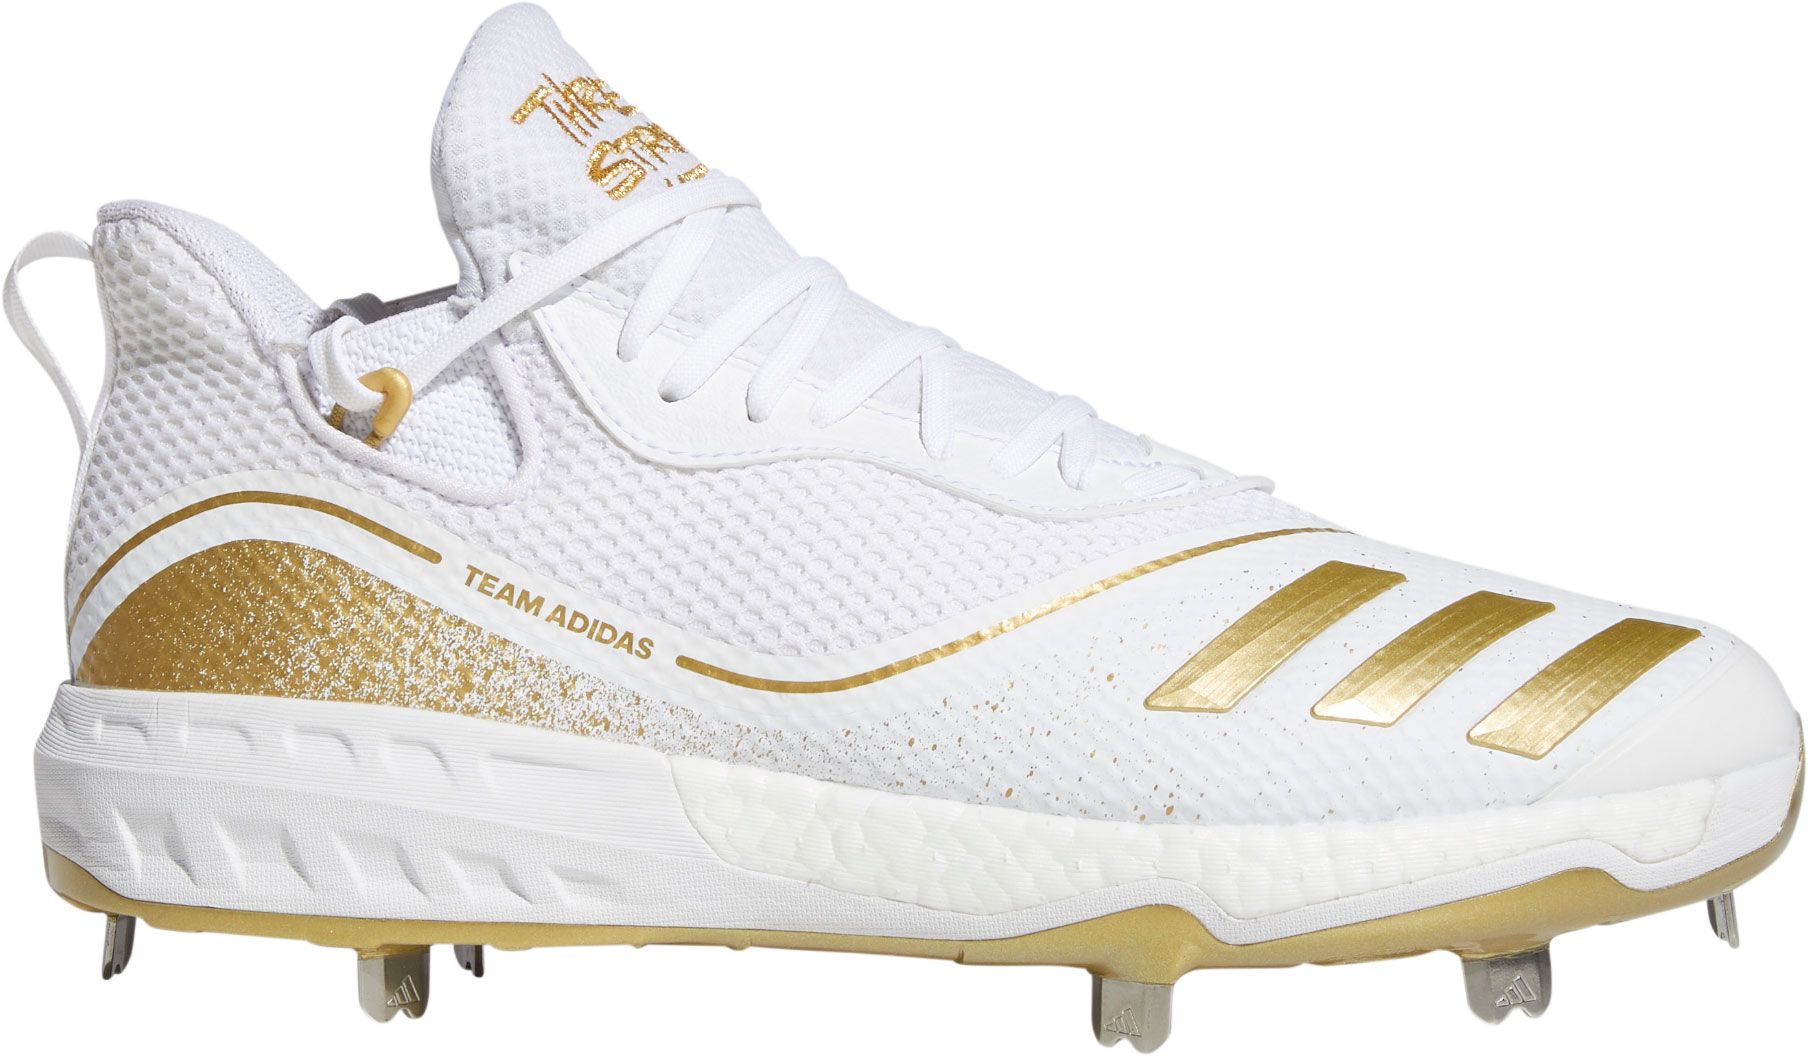 white and gold adidas baseball cleats